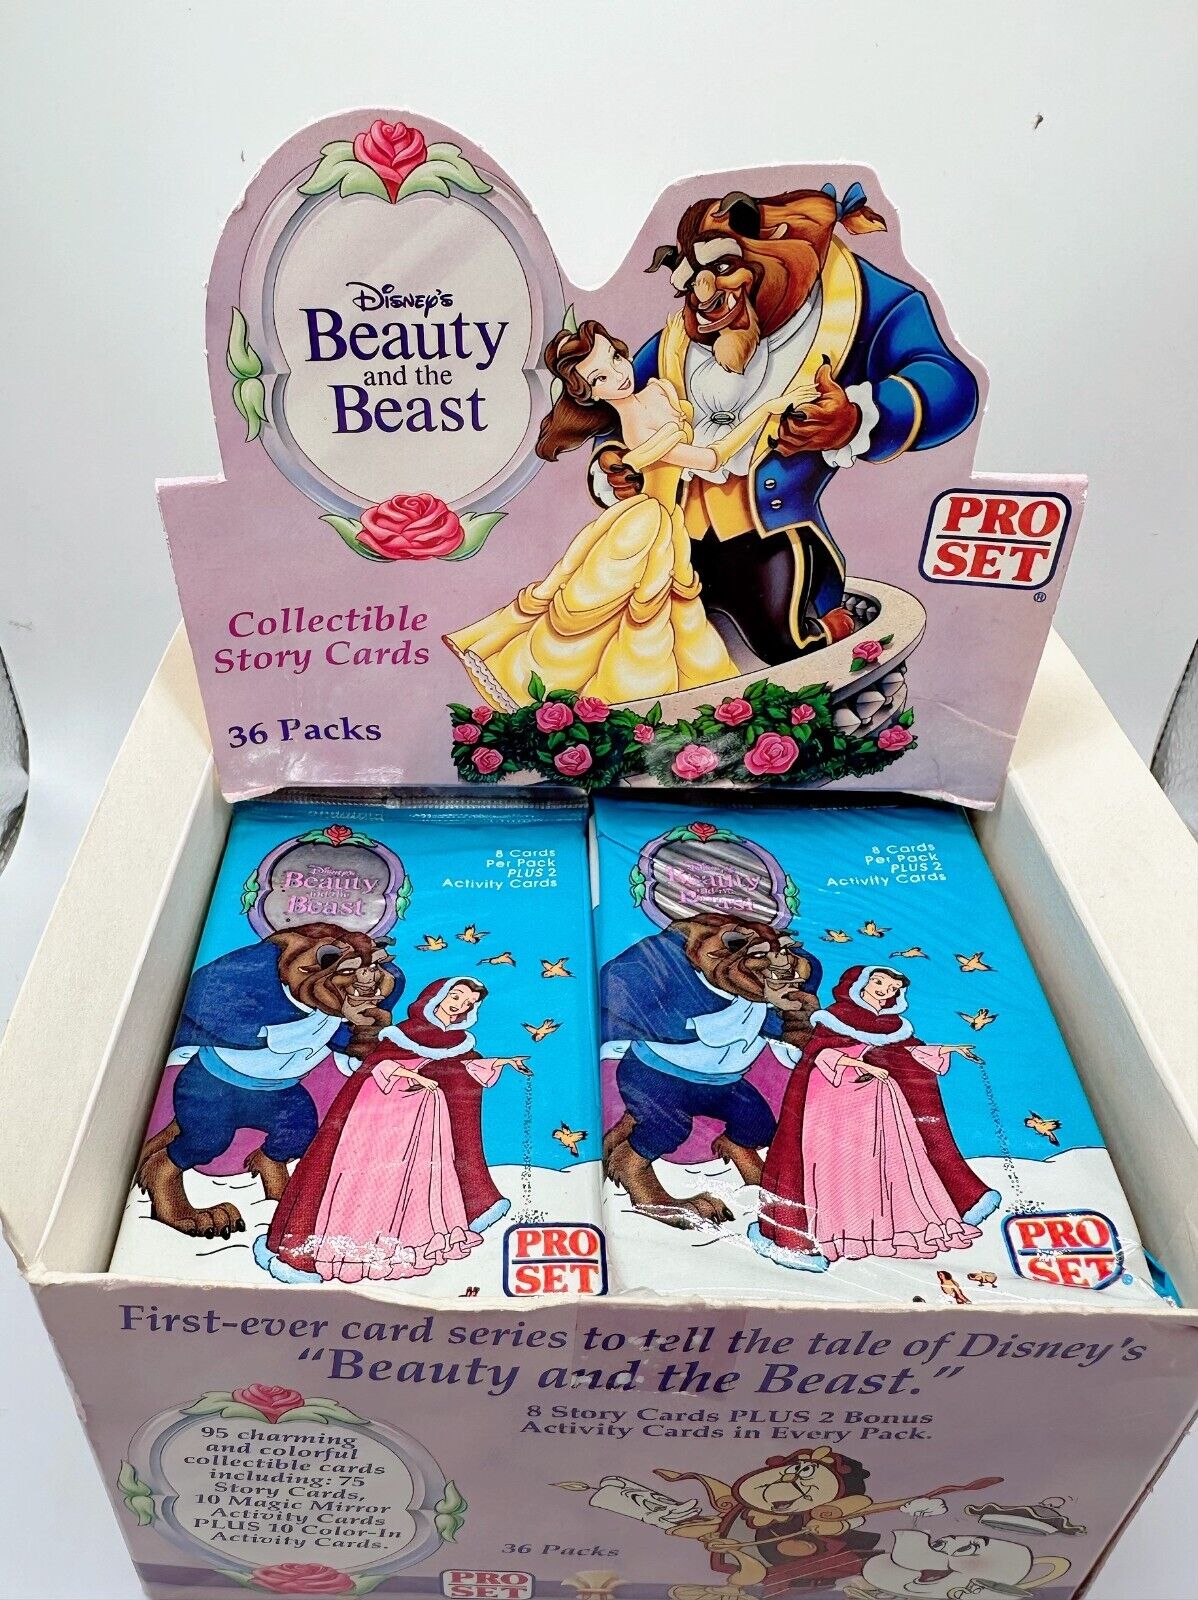 1992 Pro Set Disney\'s Beauty and the Beast Story Cards - Lot 31 Sealed Packs